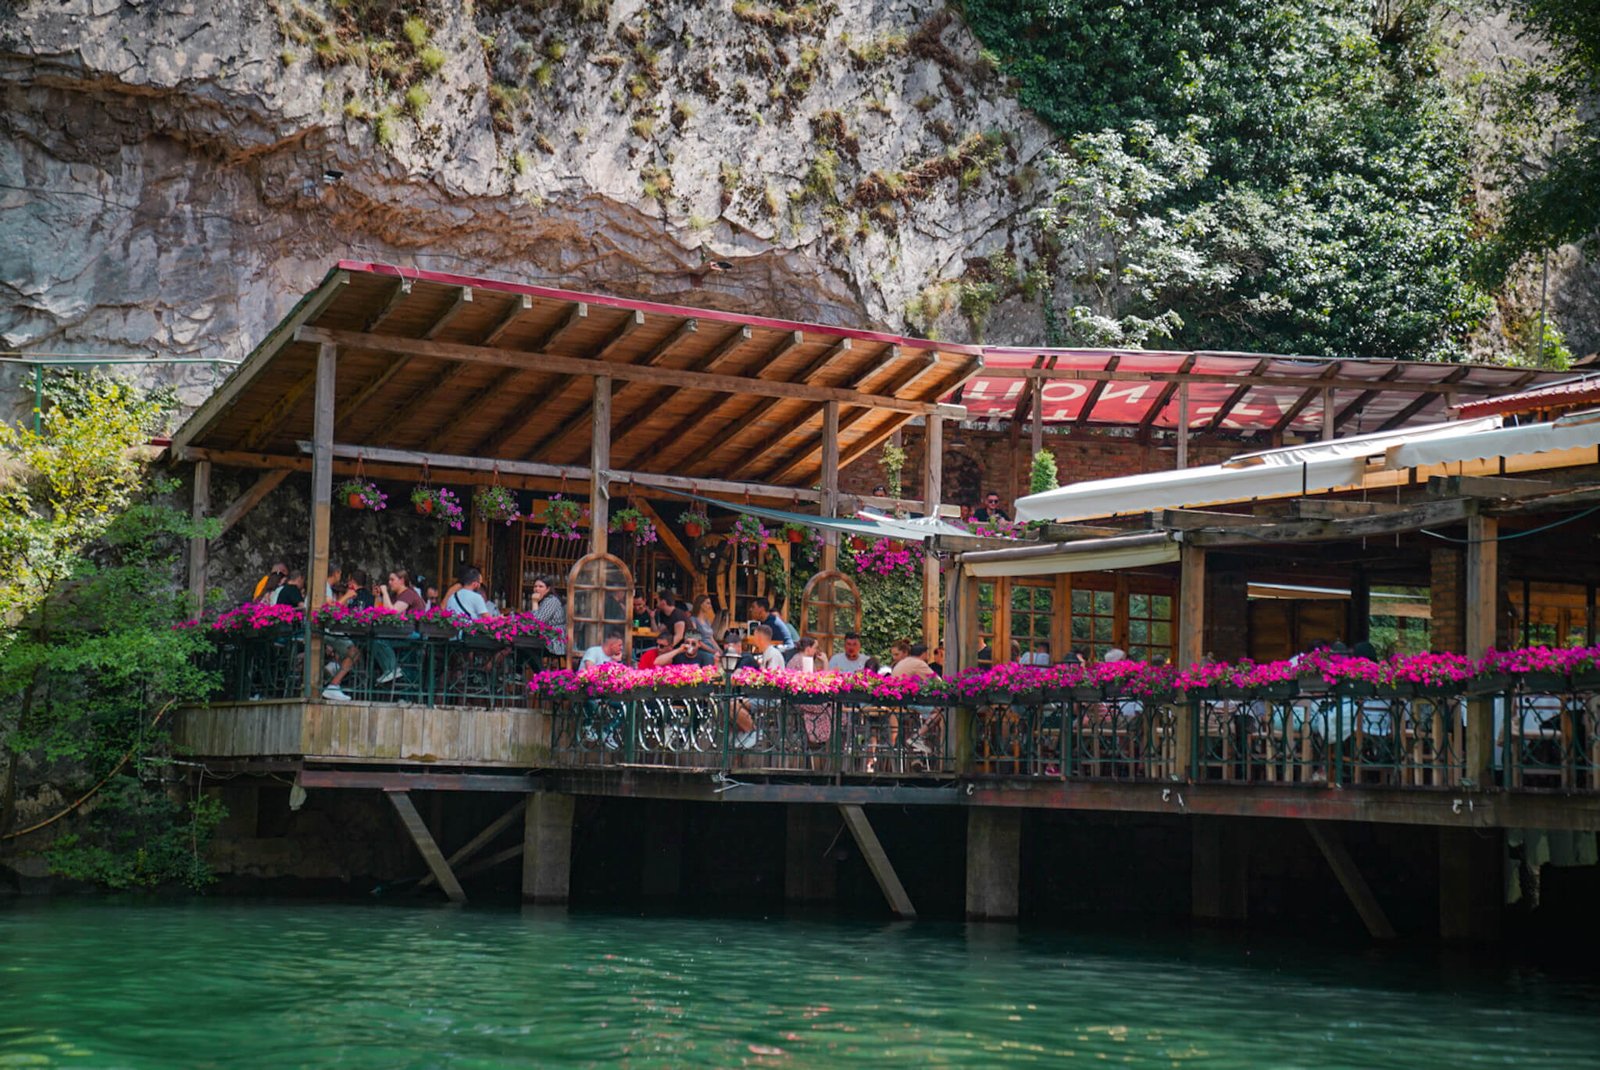 Restaurant at Matka Canyon, day trip from Skopje in Macedonia